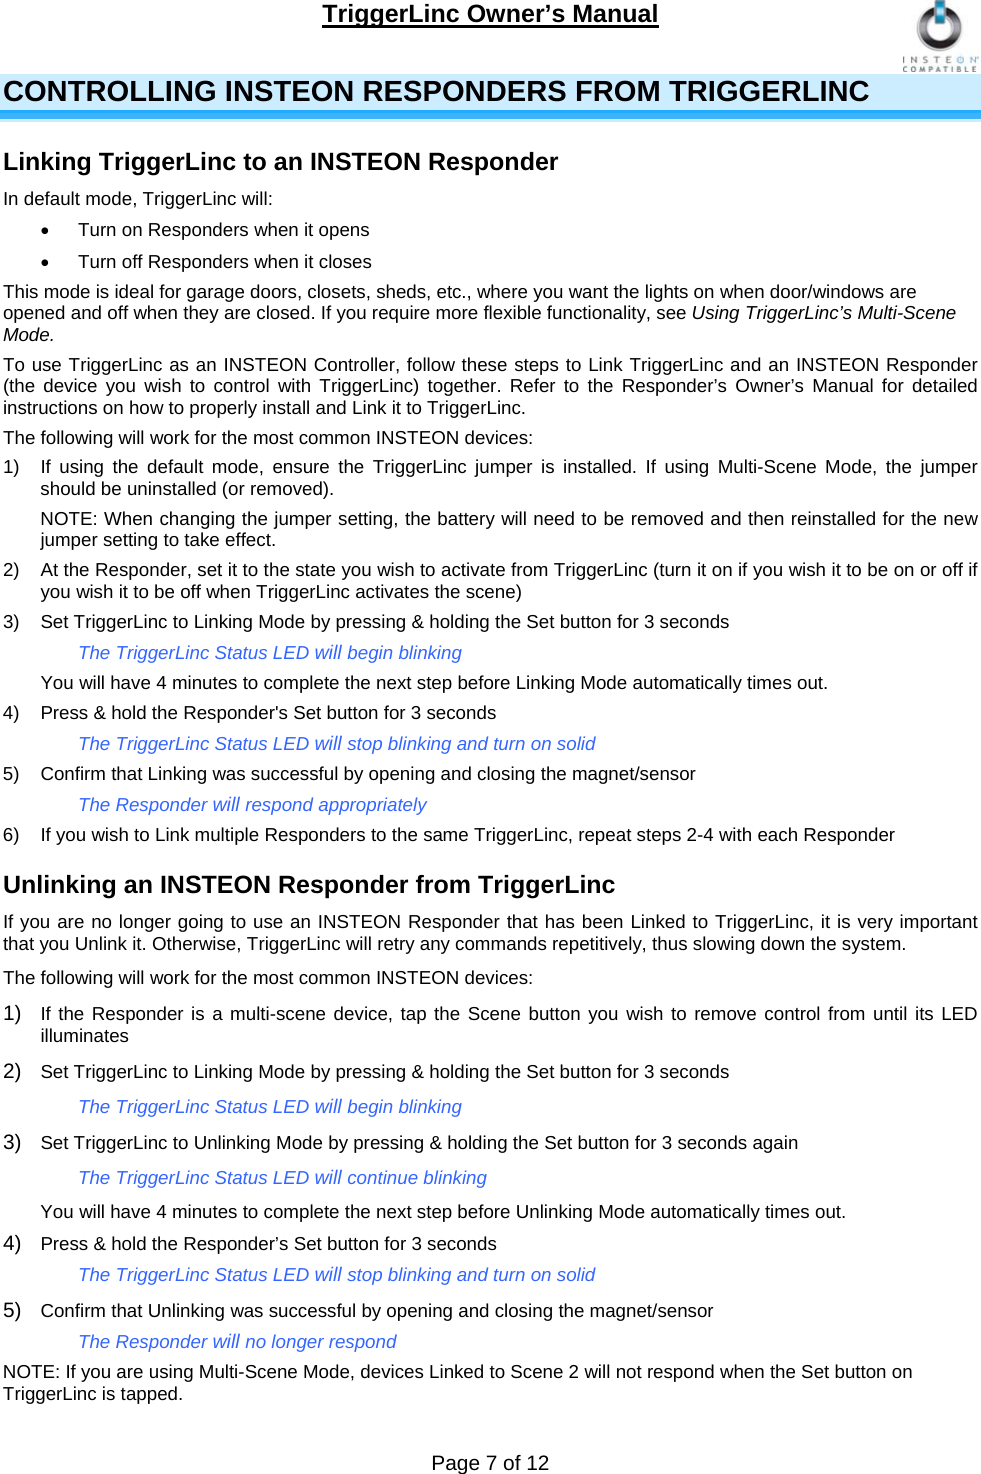 TriggerLinc Owner’s Manual   Page 7 of 12  CONTROLLING INSTEON RESPONDERS FROM TRIGGERLINC Linking TriggerLinc to an INSTEON Responder In default mode, TriggerLinc will:   Turn on Responders when it opens   Turn off Responders when it closes  This mode is ideal for garage doors, closets, sheds, etc., where you want the lights on when door/windows are opened and off when they are closed. If you require more flexible functionality, see Using TriggerLinc’s Multi-Scene Mode.  To use TriggerLinc as an INSTEON Controller, follow these steps to Link TriggerLinc and an INSTEON Responder (the device you wish to control with TriggerLinc) together. Refer to the Responder’s Owner’s Manual for detailed instructions on how to properly install and Link it to TriggerLinc.  The following will work for the most common INSTEON devices: 1)  If using the default mode, ensure the TriggerLinc jumper is installed. If using Multi-Scene Mode, the jumper should be uninstalled (or removed). NOTE: When changing the jumper setting, the battery will need to be removed and then reinstalled for the new jumper setting to take effect. 2)  At the Responder, set it to the state you wish to activate from TriggerLinc (turn it on if you wish it to be on or off if you wish it to be off when TriggerLinc activates the scene) 3)  Set TriggerLinc to Linking Mode by pressing &amp; holding the Set button for 3 seconds     The TriggerLinc Status LED will begin blinking    You will have 4 minutes to complete the next step before Linking Mode automatically times out.  4)  Press &amp; hold the Responder&apos;s Set button for 3 seconds     The TriggerLinc Status LED will stop blinking and turn on solid   5)  Confirm that Linking was successful by opening and closing the magnet/sensor    The Responder will respond appropriately 6)  If you wish to Link multiple Responders to the same TriggerLinc, repeat steps 2-4 with each Responder Unlinking an INSTEON Responder from TriggerLinc If you are no longer going to use an INSTEON Responder that has been Linked to TriggerLinc, it is very important that you Unlink it. Otherwise, TriggerLinc will retry any commands repetitively, thus slowing down the system.  The following will work for the most common INSTEON devices: 1)  If the Responder is a multi-scene device, tap the Scene button you wish to remove control from until its LED illuminates  2)  Set TriggerLinc to Linking Mode by pressing &amp; holding the Set button for 3 seconds  The TriggerLinc Status LED will begin blinking  3)  Set TriggerLinc to Unlinking Mode by pressing &amp; holding the Set button for 3 seconds again  The TriggerLinc Status LED will continue blinking  You will have 4 minutes to complete the next step before Unlinking Mode automatically times out.  4)  Press &amp; hold the Responder’s Set button for 3 seconds The TriggerLinc Status LED will stop blinking and turn on solid  5)  Confirm that Unlinking was successful by opening and closing the magnet/sensor  The Responder will no longer respond NOTE: If you are using Multi-Scene Mode, devices Linked to Scene 2 will not respond when the Set button on TriggerLinc is tapped.  